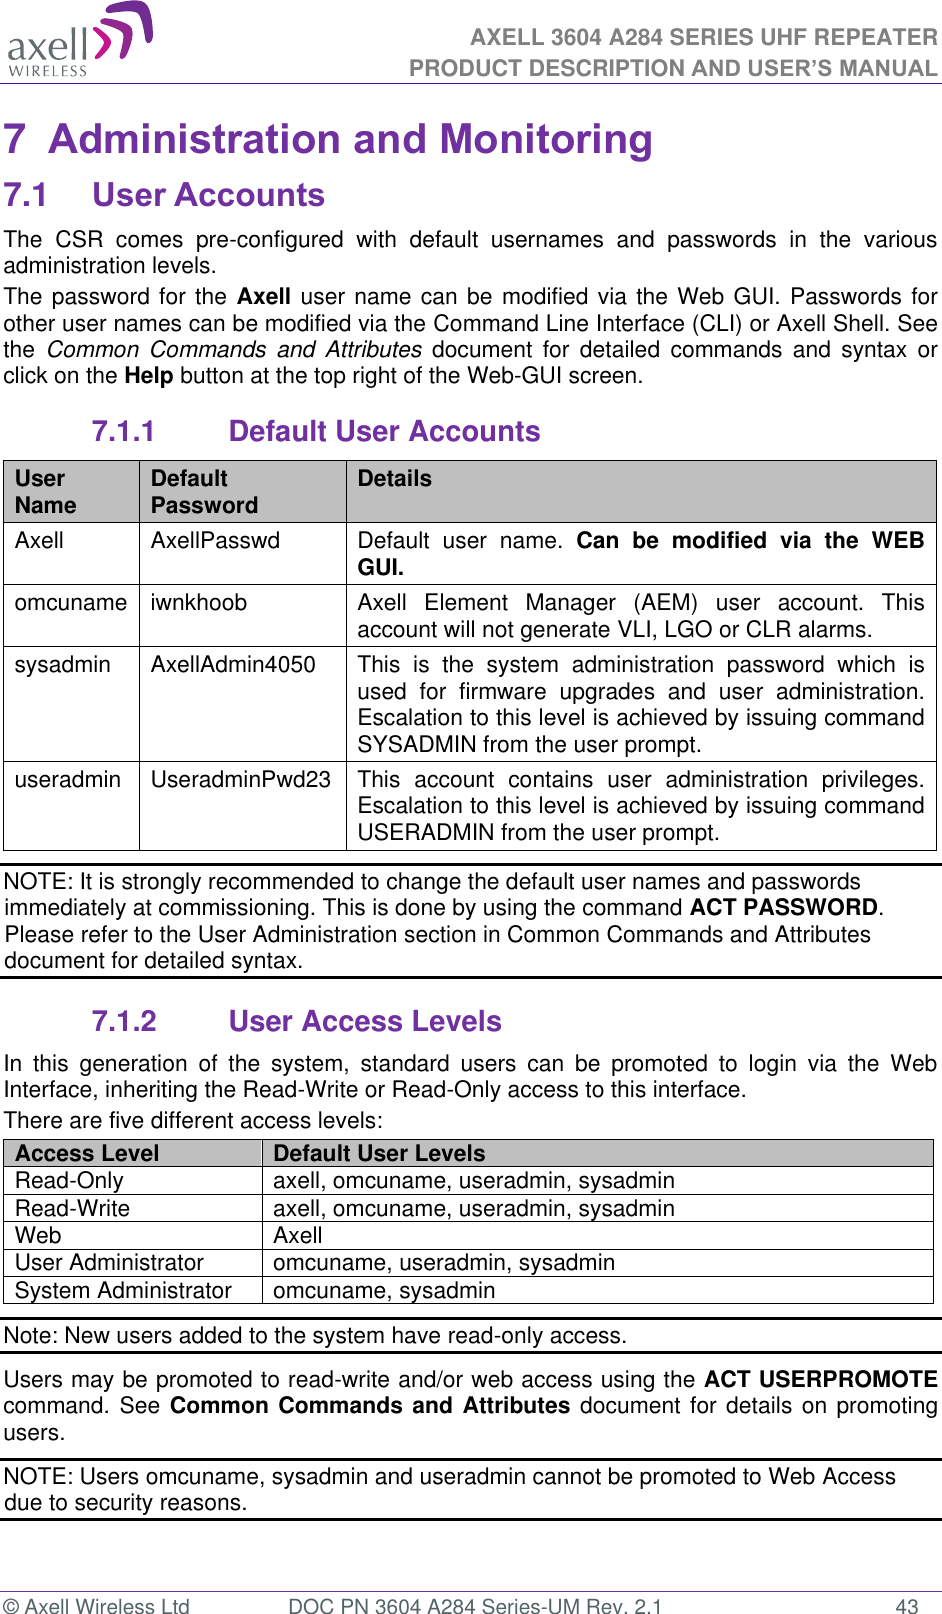 AXELL 3604 A284 SERIES UHF REPEATER PRODUCT DESCRIPTION AND USER’S MANUAL  © Axell Wireless Ltd  DOC PN 3604 A284 Series-UM Rev. 2.1  43 7  Administration and Monitoring 7.1  User Accounts The  CSR  comes  pre-configured  with  default  usernames  and  passwords  in  the  various administration levels. The password for the Axell user name can be modified via the Web GUI. Passwords for other user names can be modified via the Command Line Interface (CLI) or Axell Shell. See the  Common  Commands  and  Attributes  document  for  detailed  commands  and  syntax  or click on the Help button at the top right of the Web-GUI screen. 7.1.1  Default User Accounts User Name Default Password Details Axell AxellPasswd Default  user  name.  Can  be  modified  via  the  WEB GUI. omcuname iwnkhoob Axell  Element  Manager  (AEM)  user  account.  This account will not generate VLI, LGO or CLR alarms. sysadmin AxellAdmin4050 This  is  the  system  administration  password  which  is used  for  firmware  upgrades  and  user  administration. Escalation to this level is achieved by issuing command SYSADMIN from the user prompt. useradmin UseradminPwd23 This  account  contains  user  administration  privileges. Escalation to this level is achieved by issuing command USERADMIN from the user prompt. NOTE: It is strongly recommended to change the default user names and passwords immediately at commissioning. This is done by using the command ACT PASSWORD. Please refer to the User Administration section in Common Commands and Attributes document for detailed syntax. 7.1.2  User Access Levels In  this  generation  of  the  system,  standard  users  can  be  promoted  to  login  via  the  Web Interface, inheriting the Read-Write or Read-Only access to this interface. There are five different access levels: Access Level Default User Levels Read-Only axell, omcuname, useradmin, sysadmin Read-Write axell, omcuname, useradmin, sysadmin Web Axell User Administrator omcuname, useradmin, sysadmin System Administrator omcuname, sysadmin Note: New users added to the system have read-only access. Users may be promoted to read-write and/or web access using the ACT USERPROMOTE command. See Common Commands and Attributes document for details on promoting users. NOTE: Users omcuname, sysadmin and useradmin cannot be promoted to Web Access due to security reasons. 